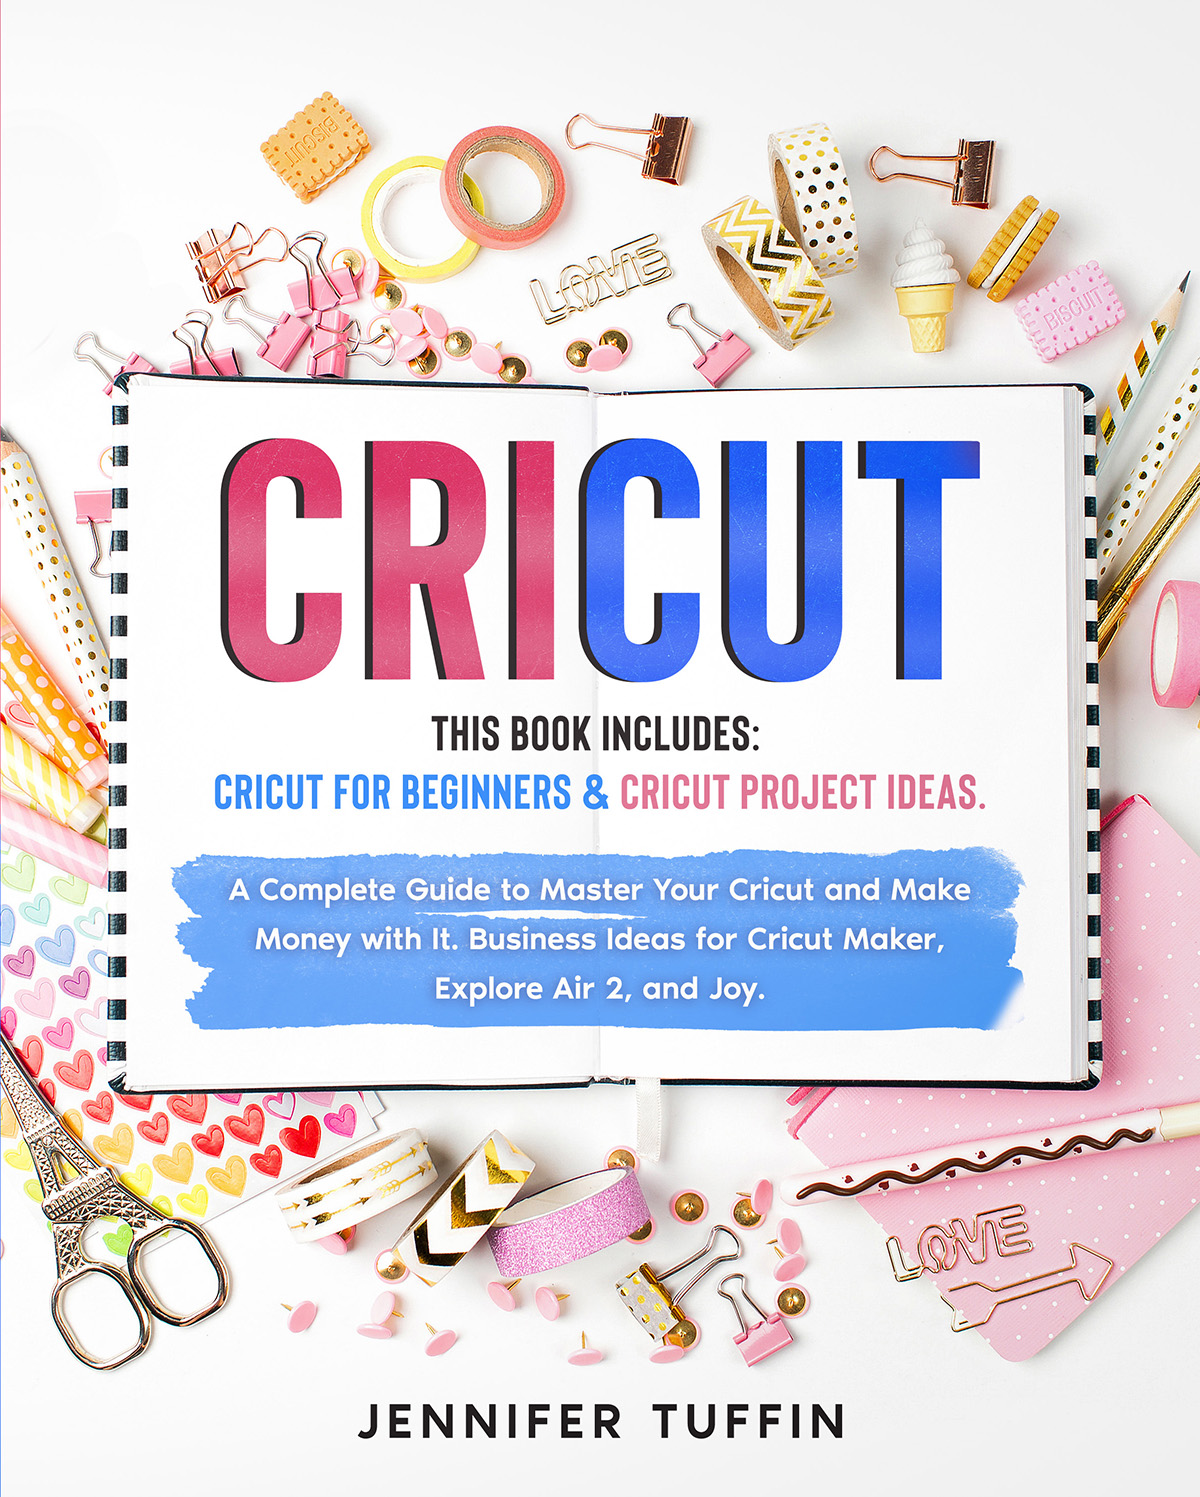 FREE: Cricut: 2 Books in 1: Cricut for Beginners & Cricut Project Ideas. A Complete Guide to Master Your Cricut and Make Money with It. Business Ideas for Cricut Maker, Explore Air 2, and Joy. by Jennifer Tuffin